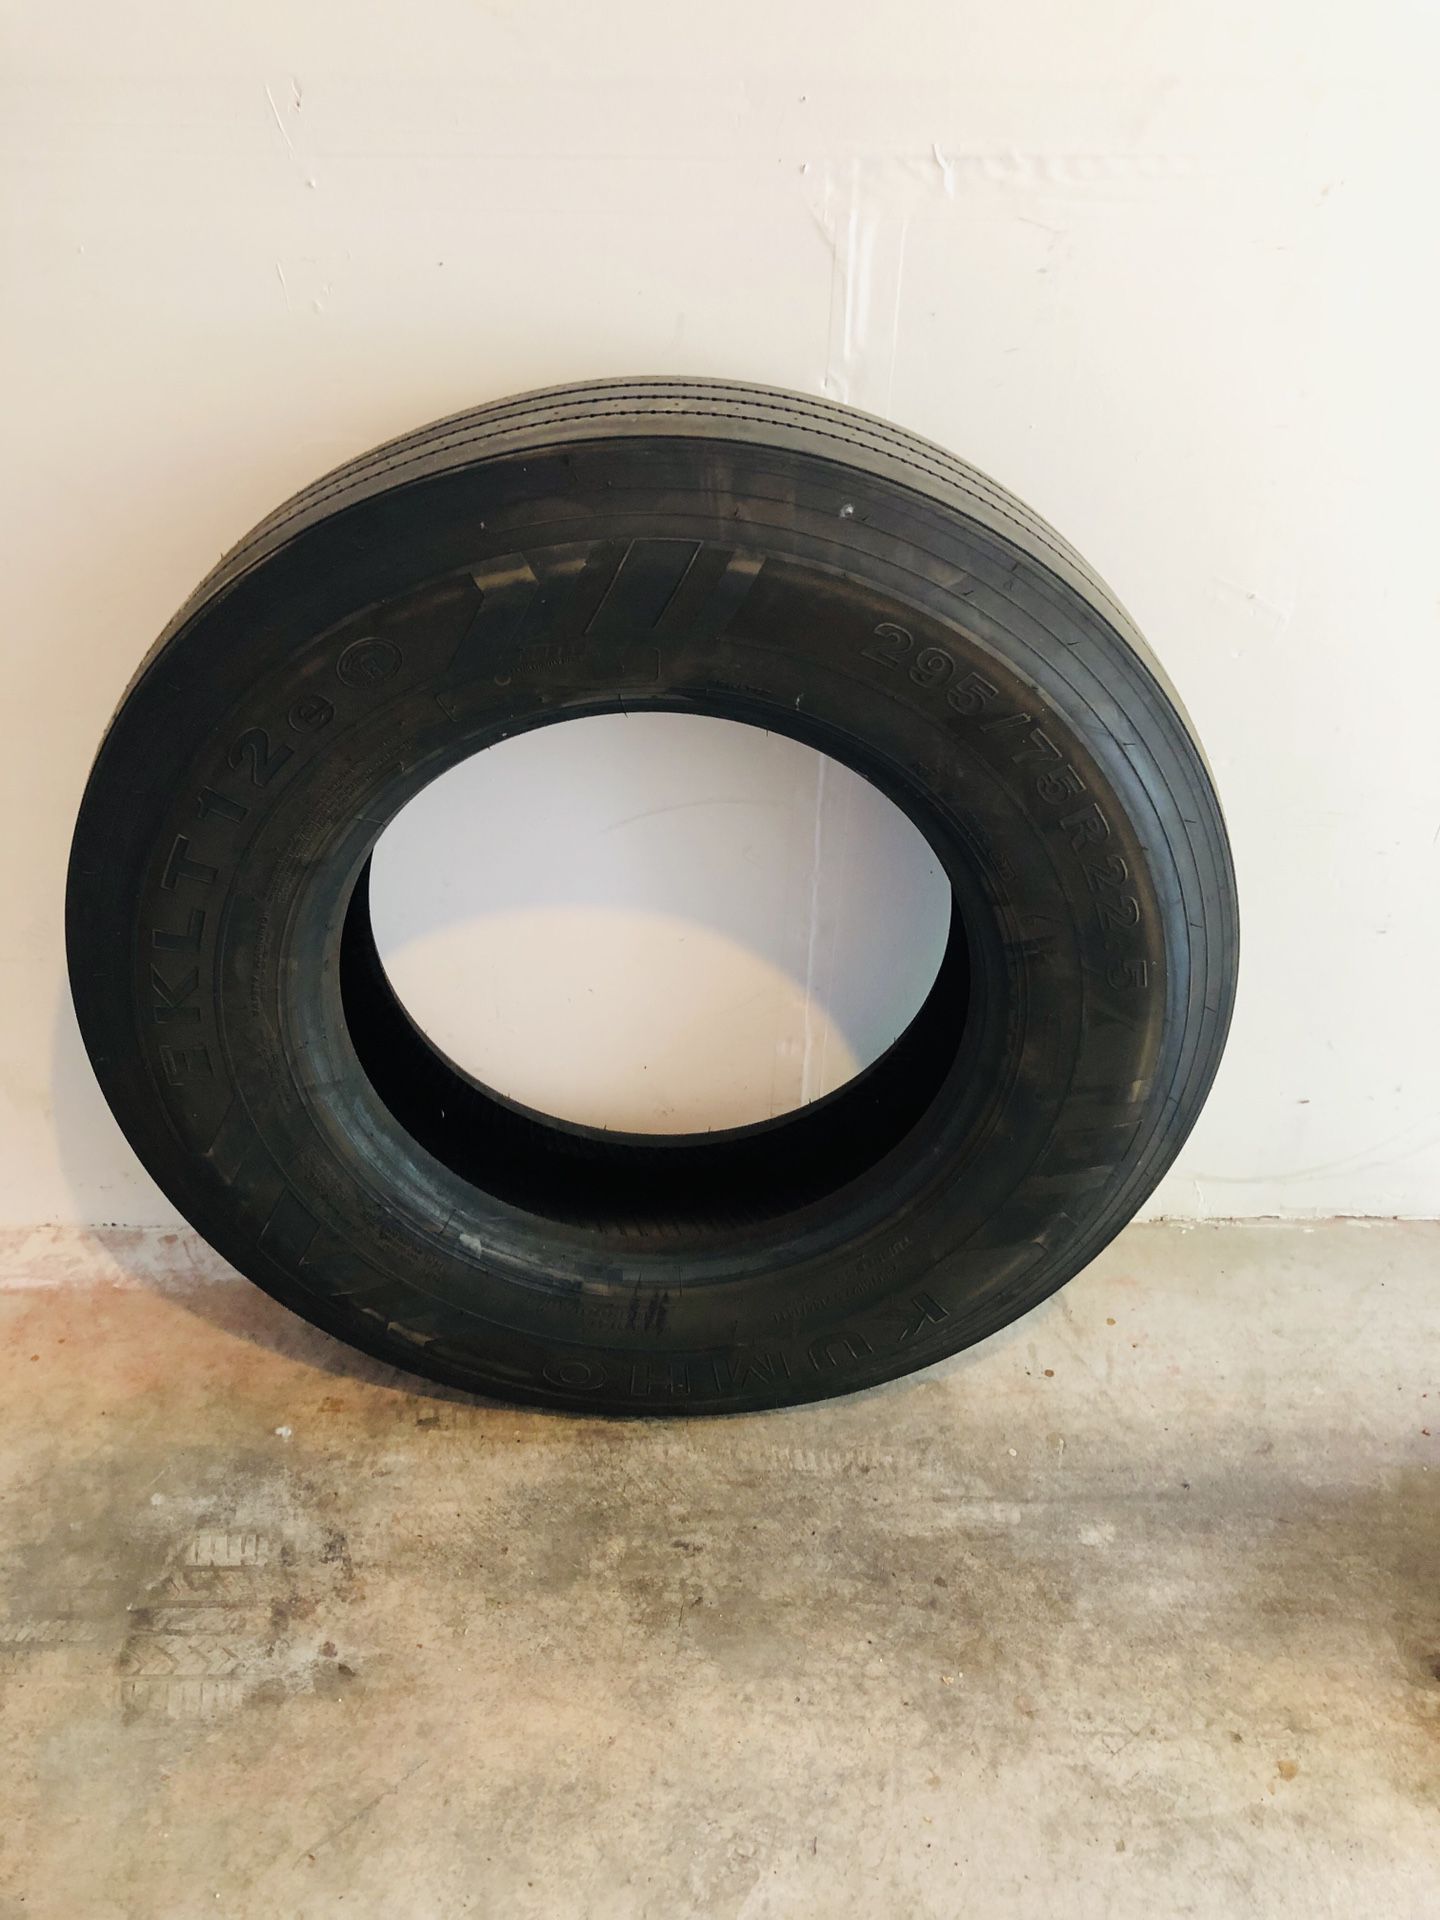 Trailer tire for sale, just 5k miles on it, size 295/75R 22.5, price 160$